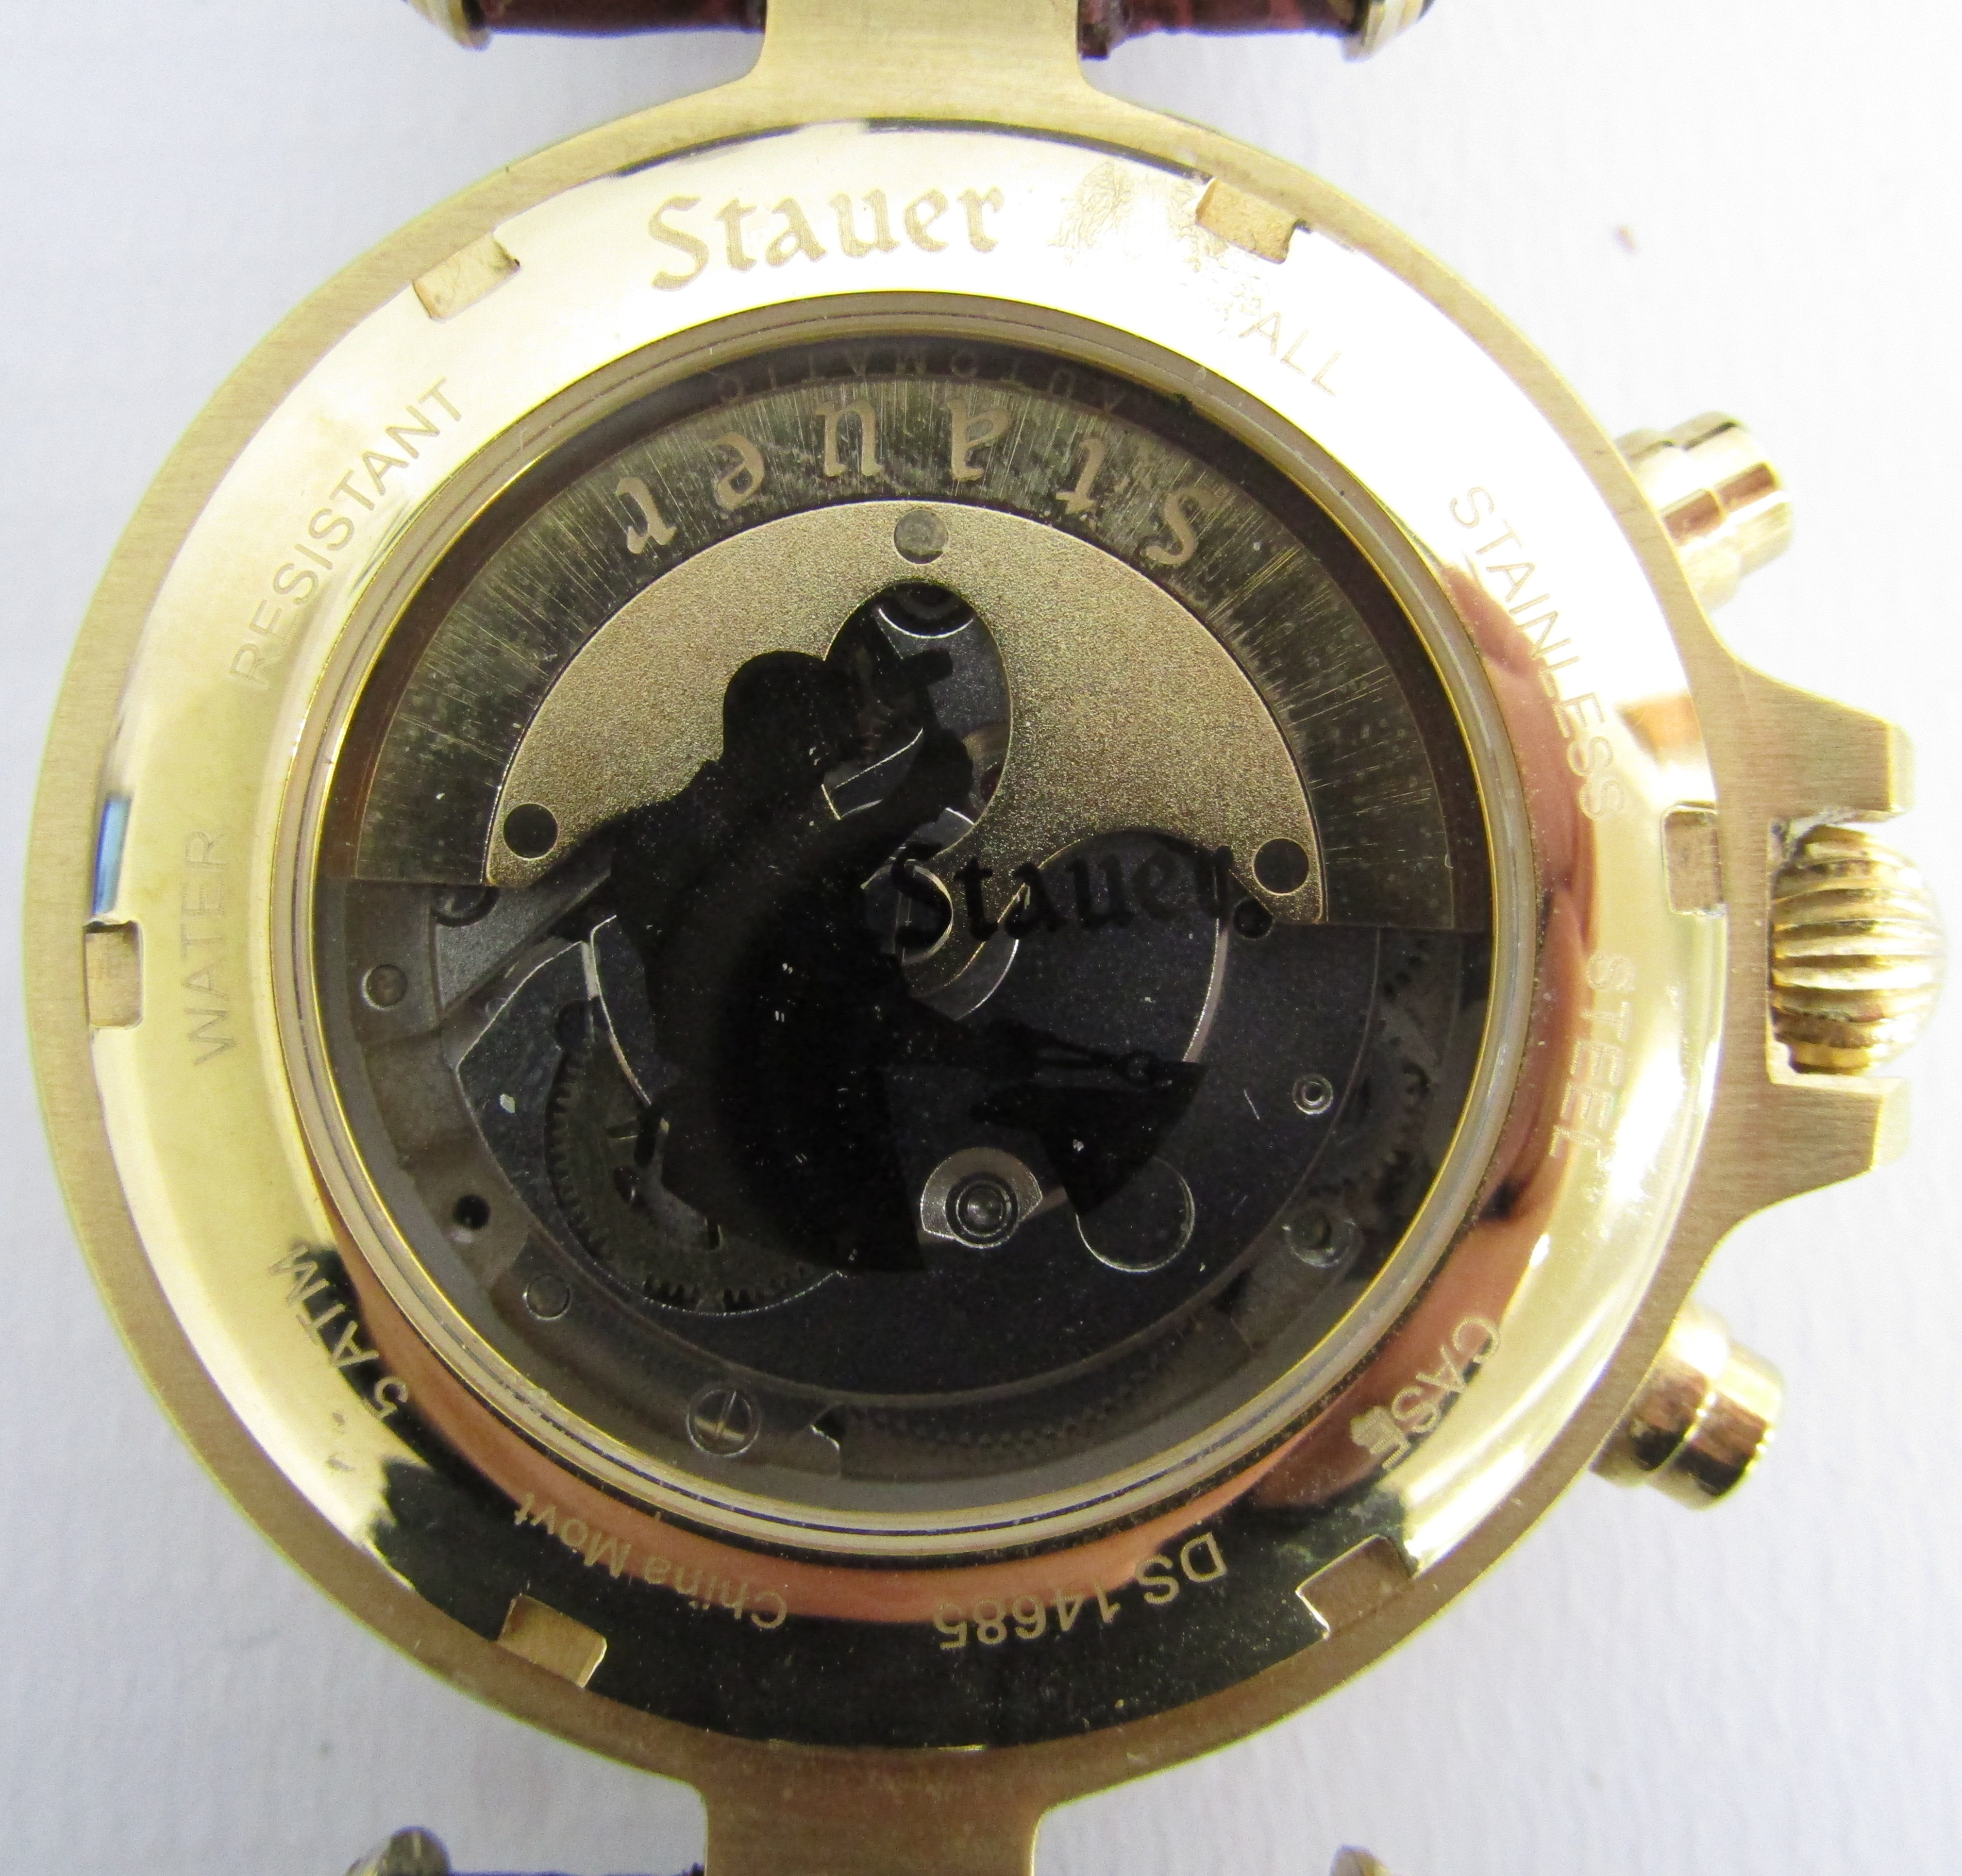 Stauer Premier Collection DS 14685 gold plated Noir day/month/date automatic watch with leather - Image 3 of 7